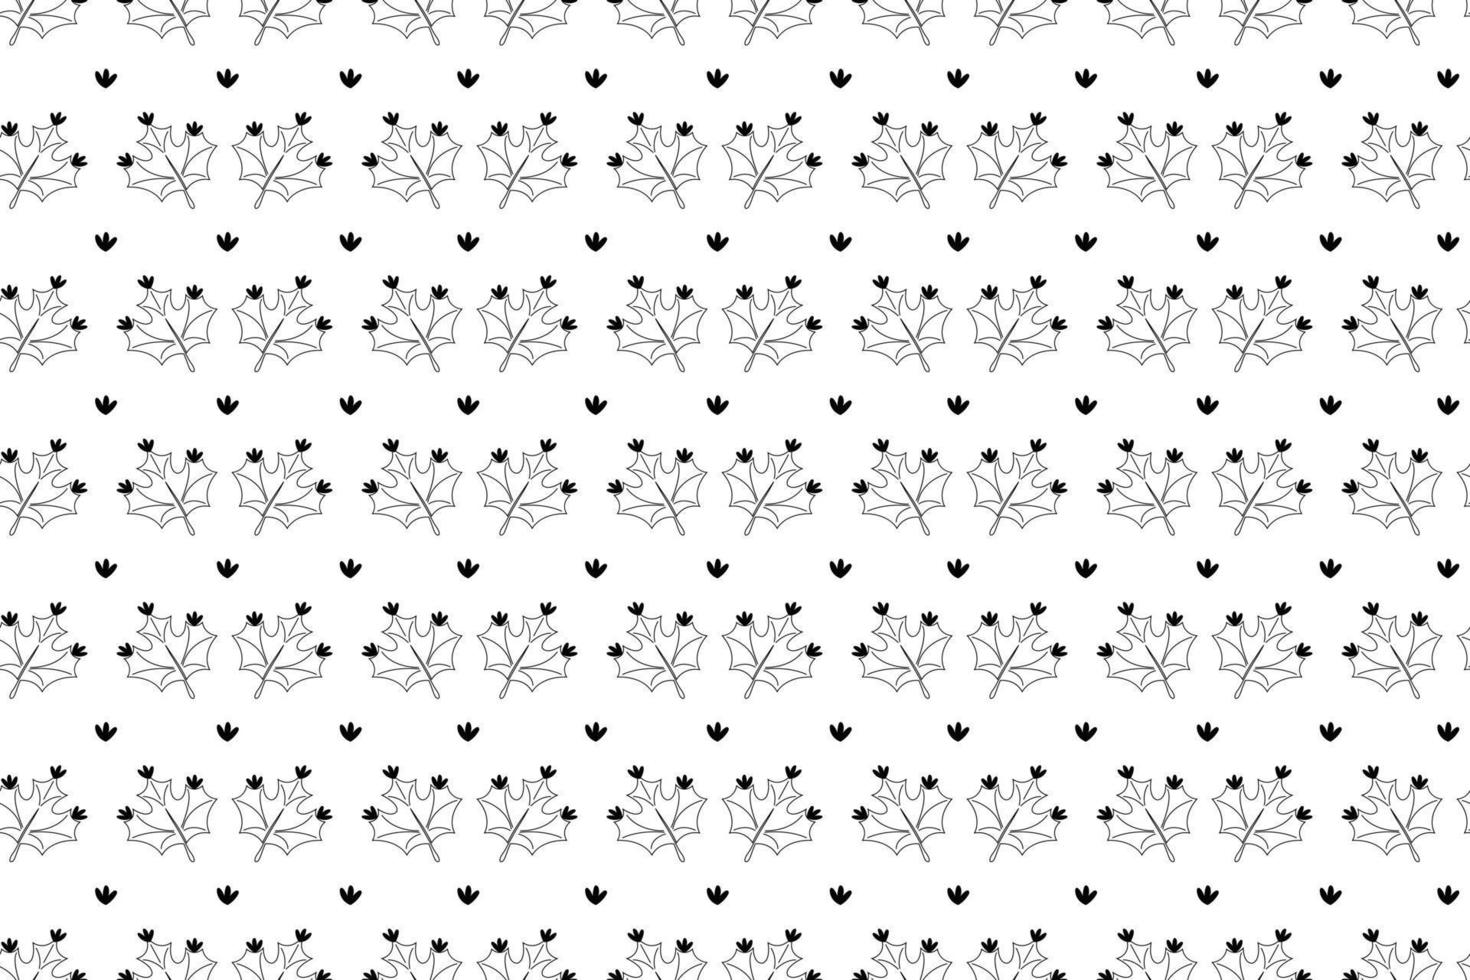 Abstract Seamless Pattern vector